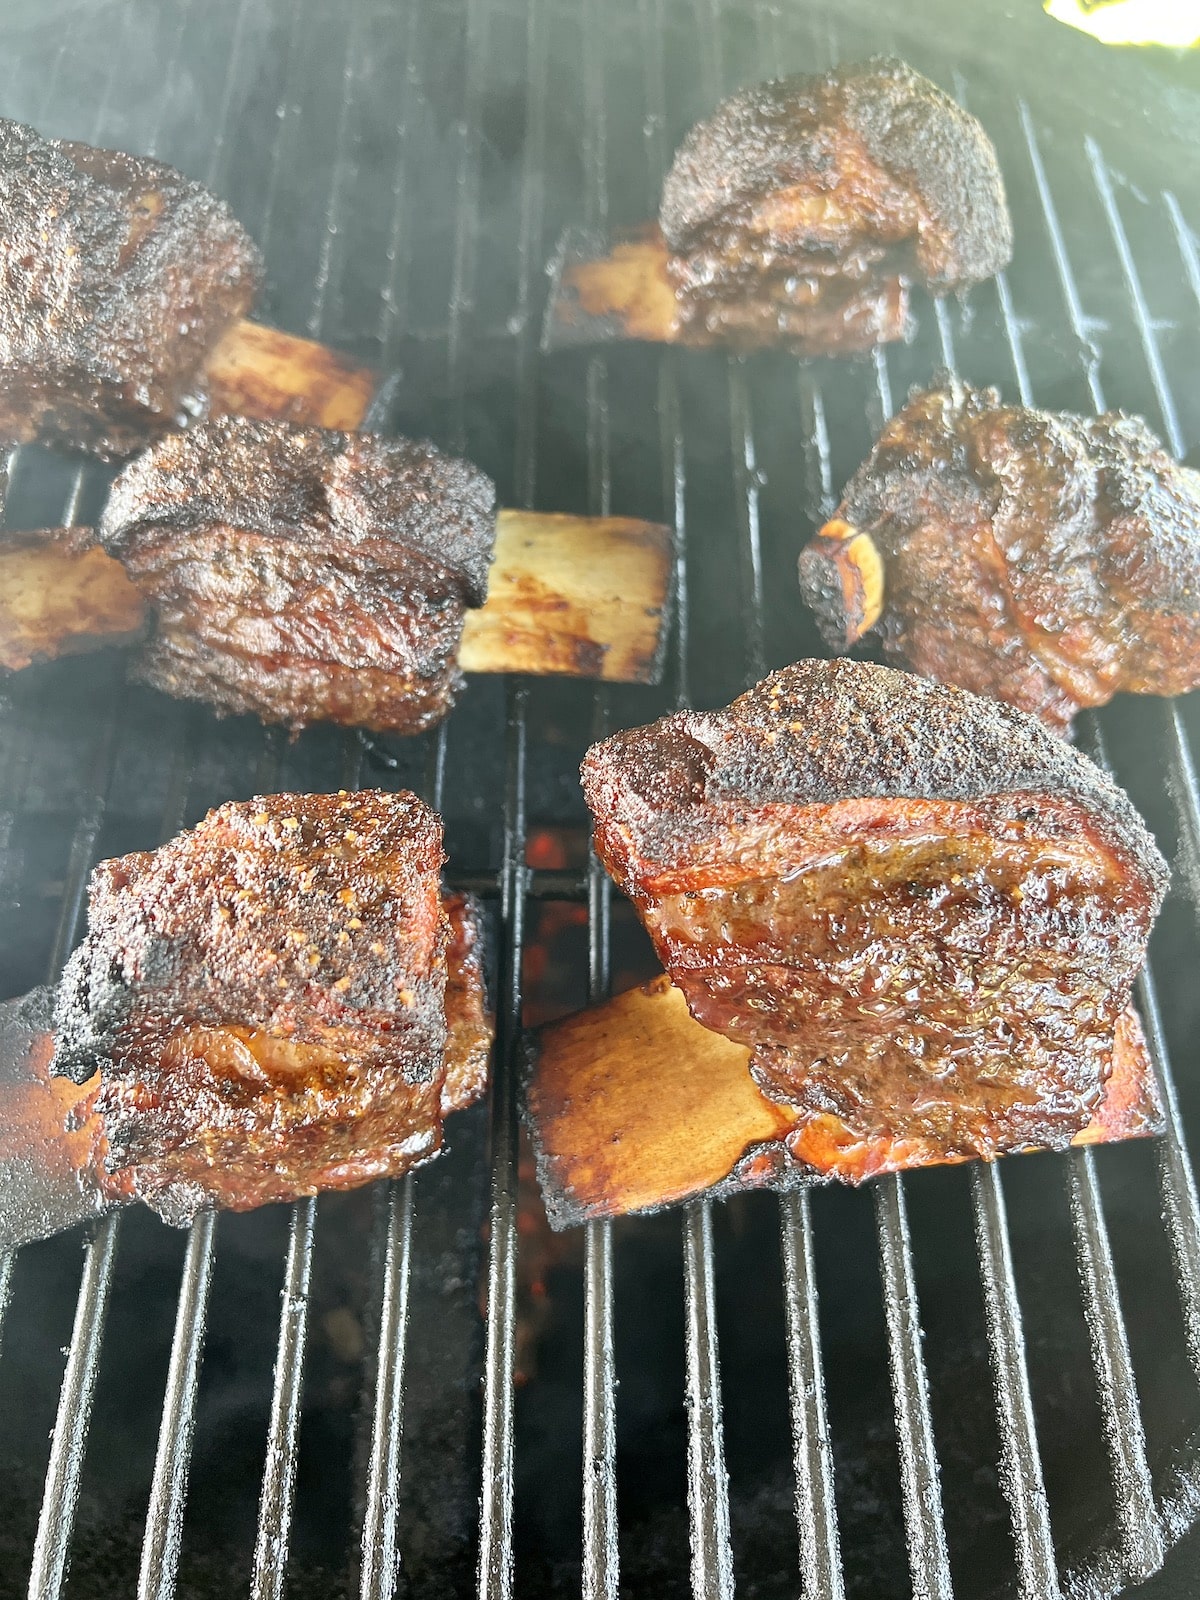 Short ribs on a grill.